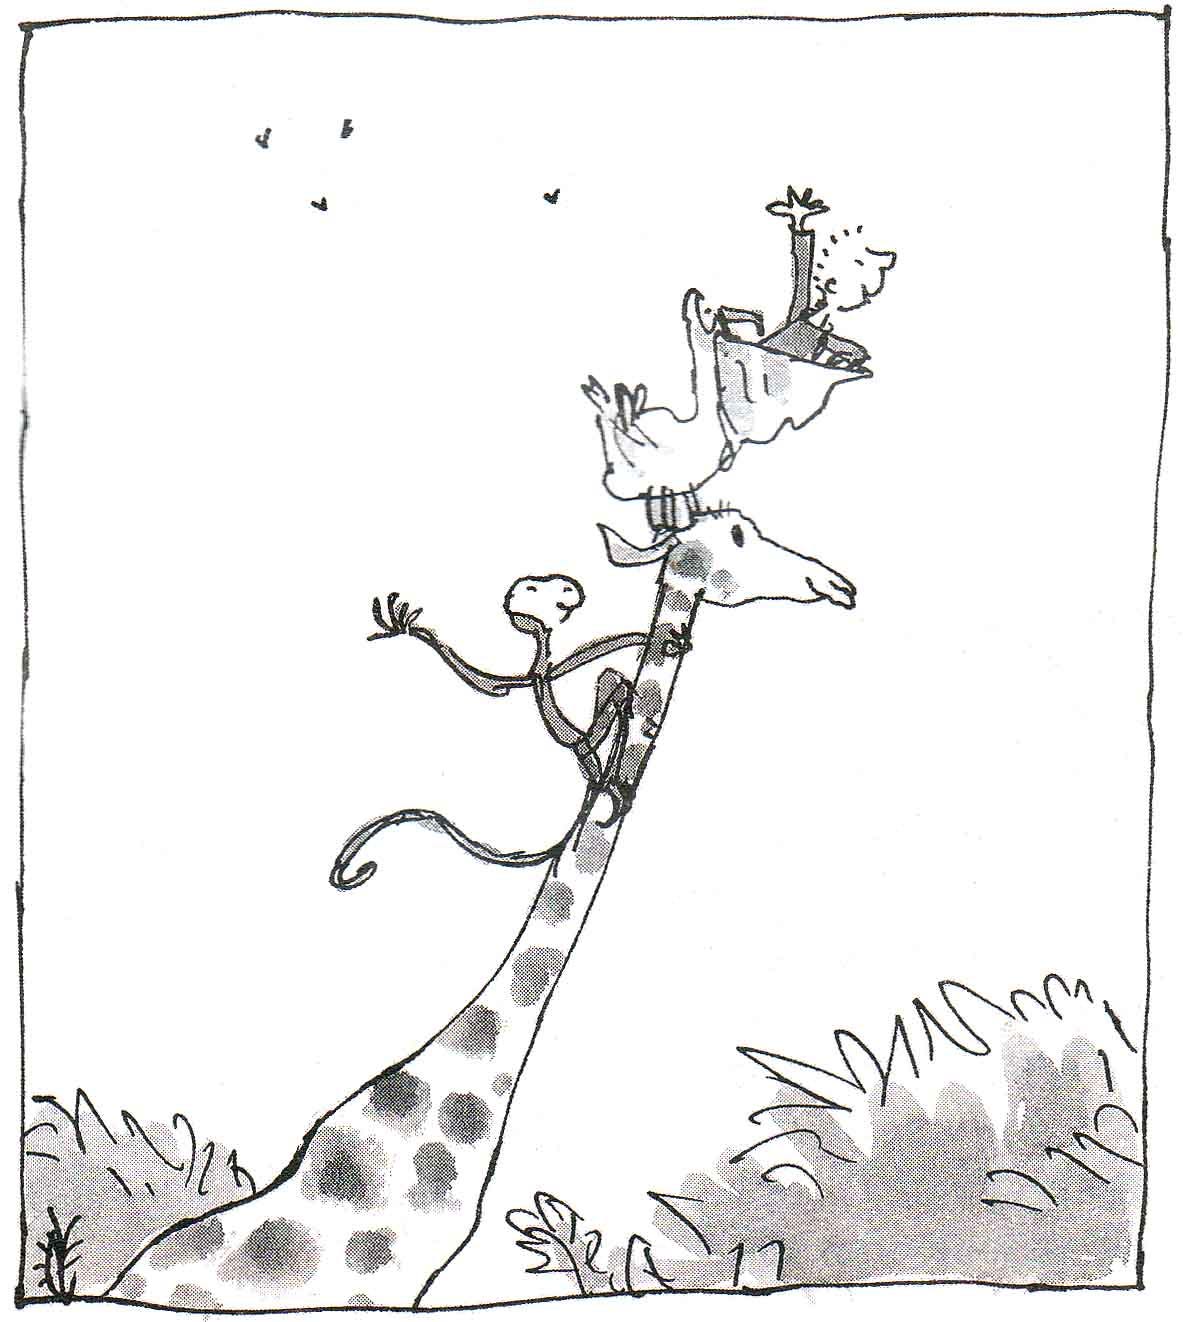 a giraffe with a monkey, a pelican, and a boy riding on neck